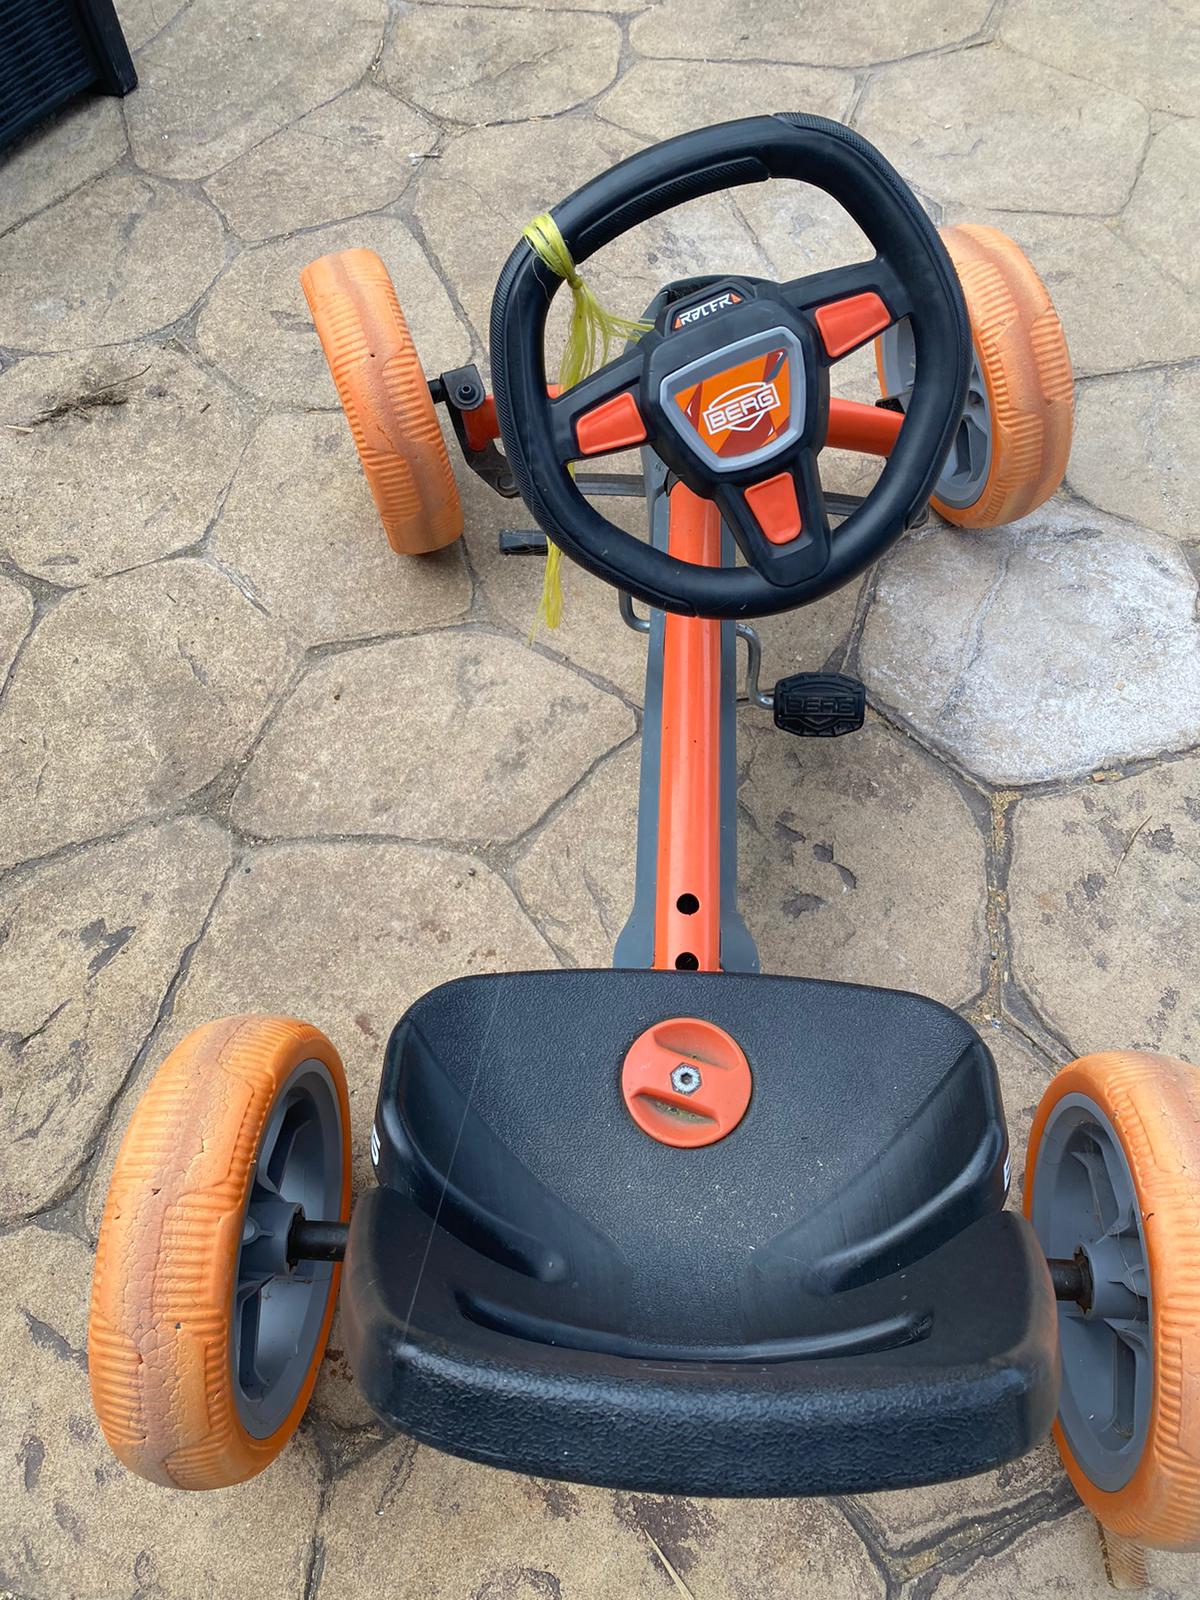 UK's best kids go karts: top pedal go karts tested for two years! »  Shetland's Garden Tool Box